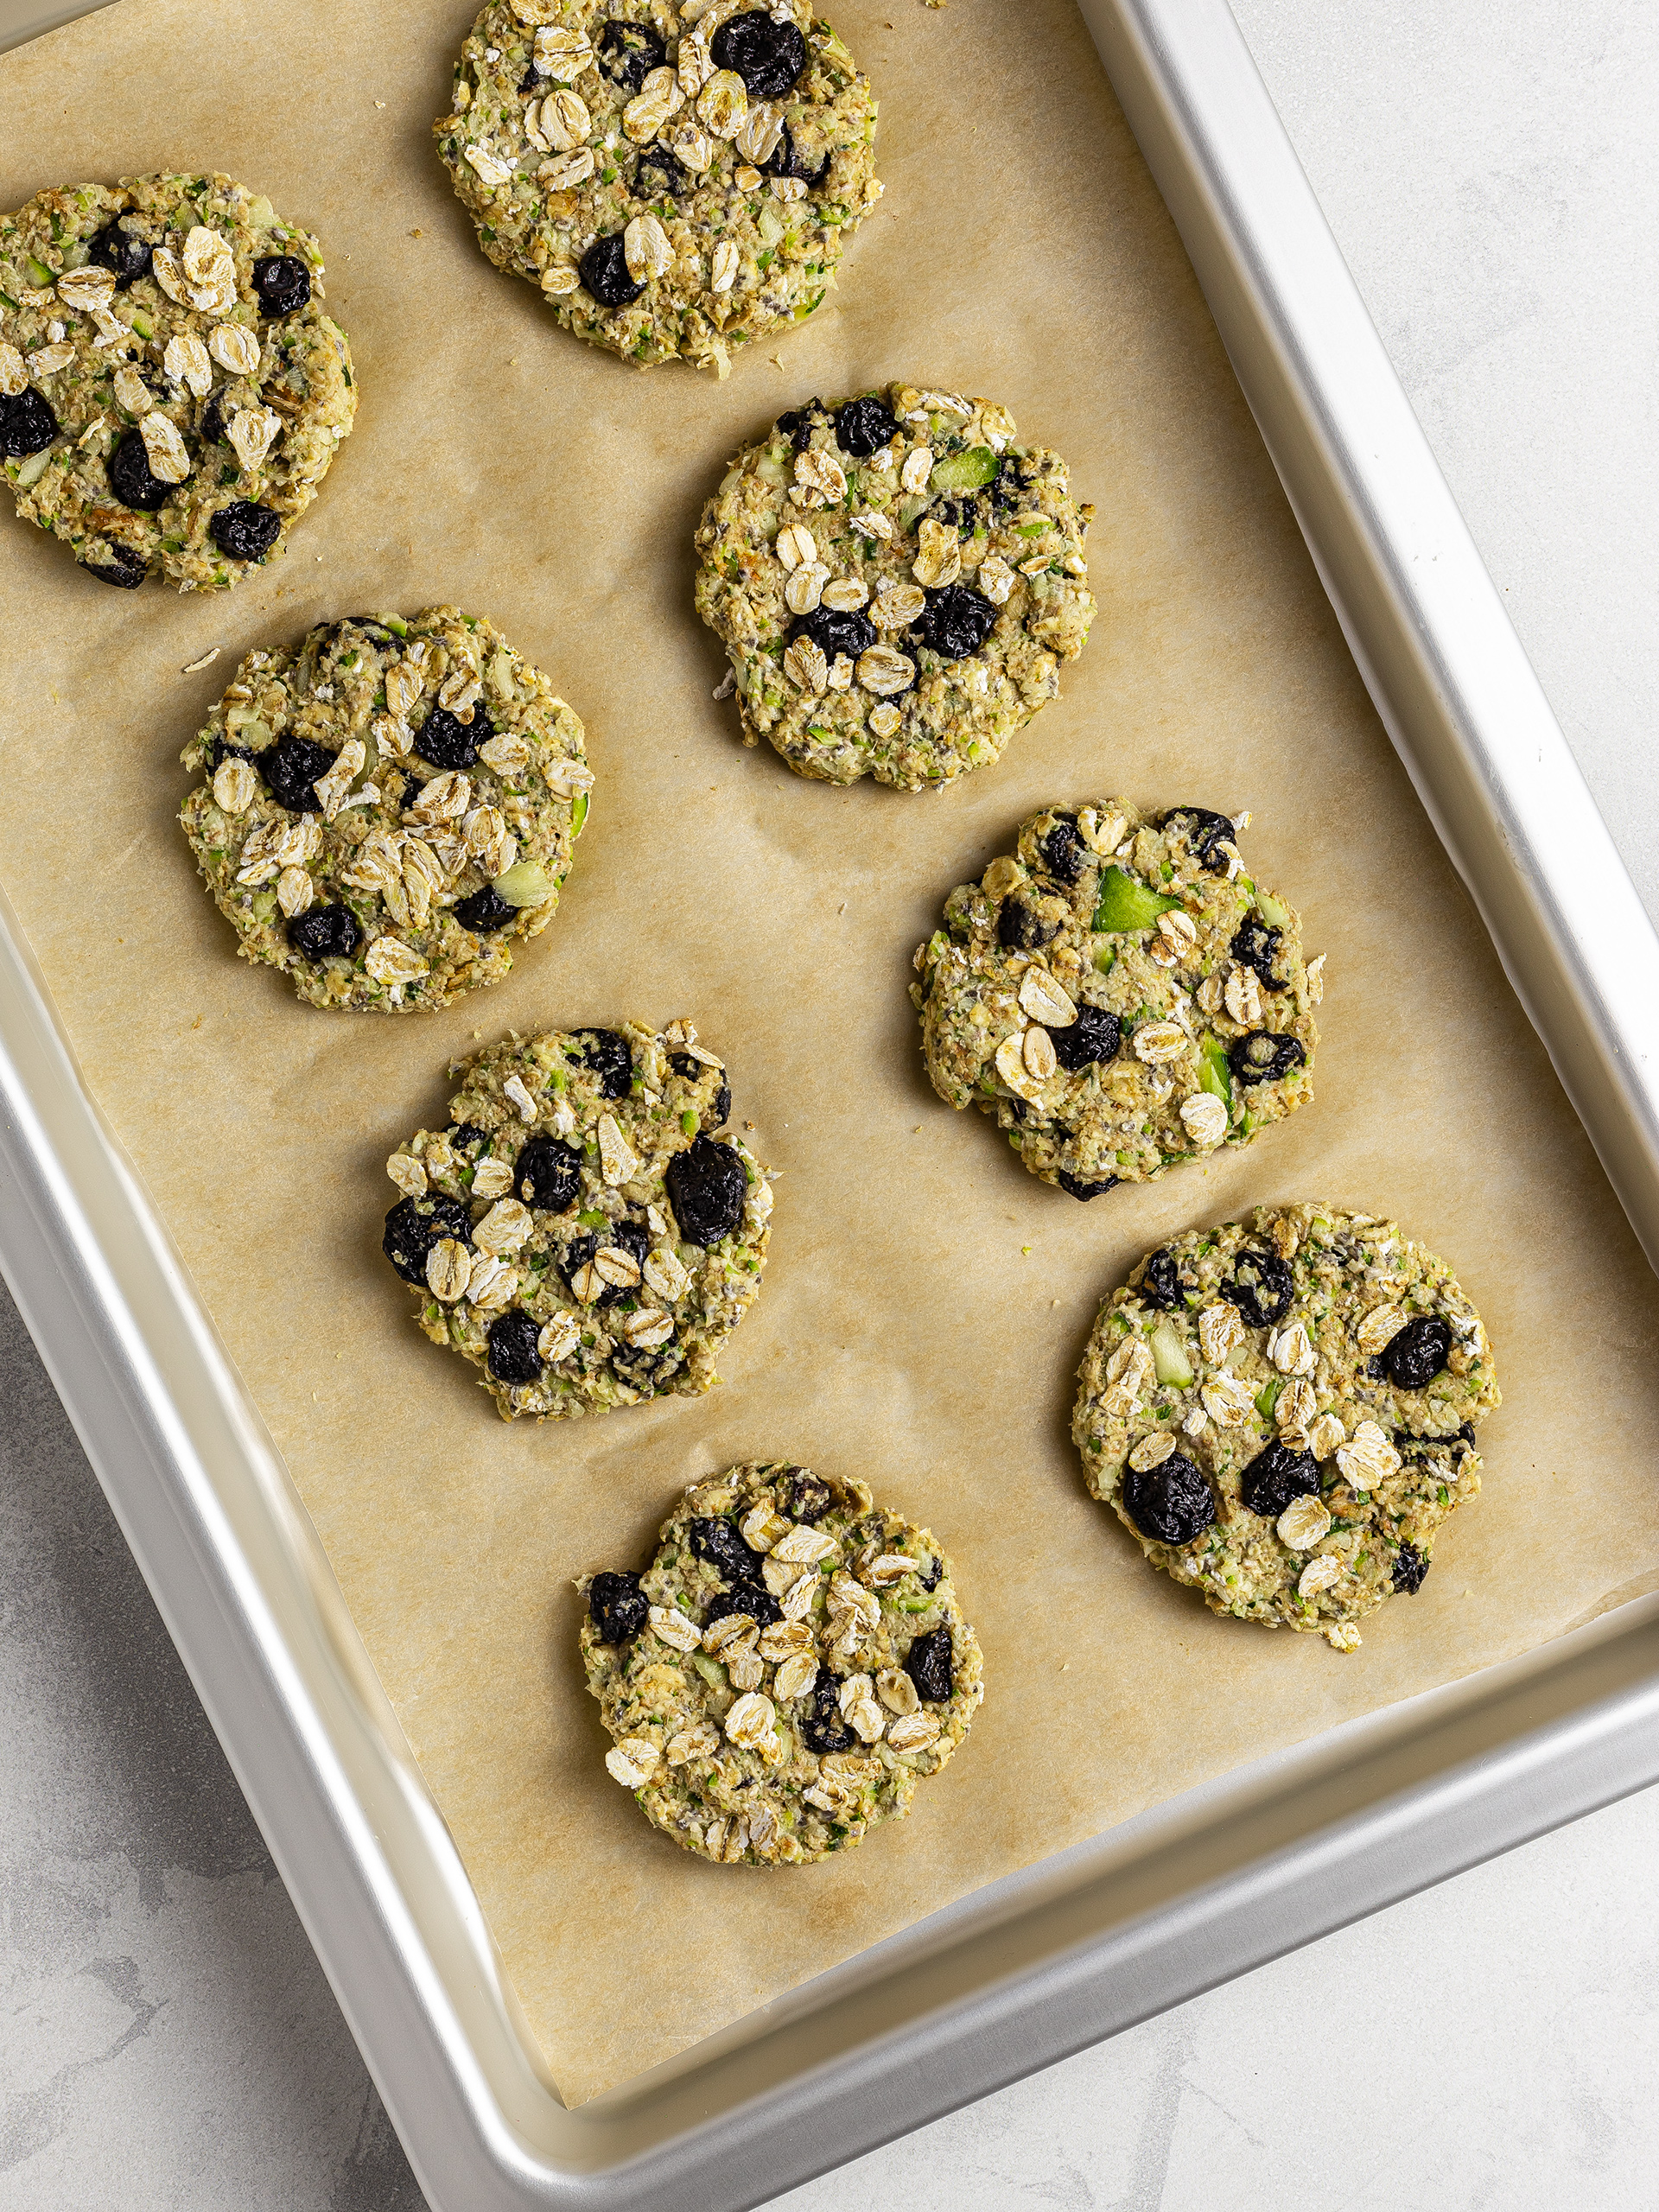 Shaped zucchini cookies on a baking tray